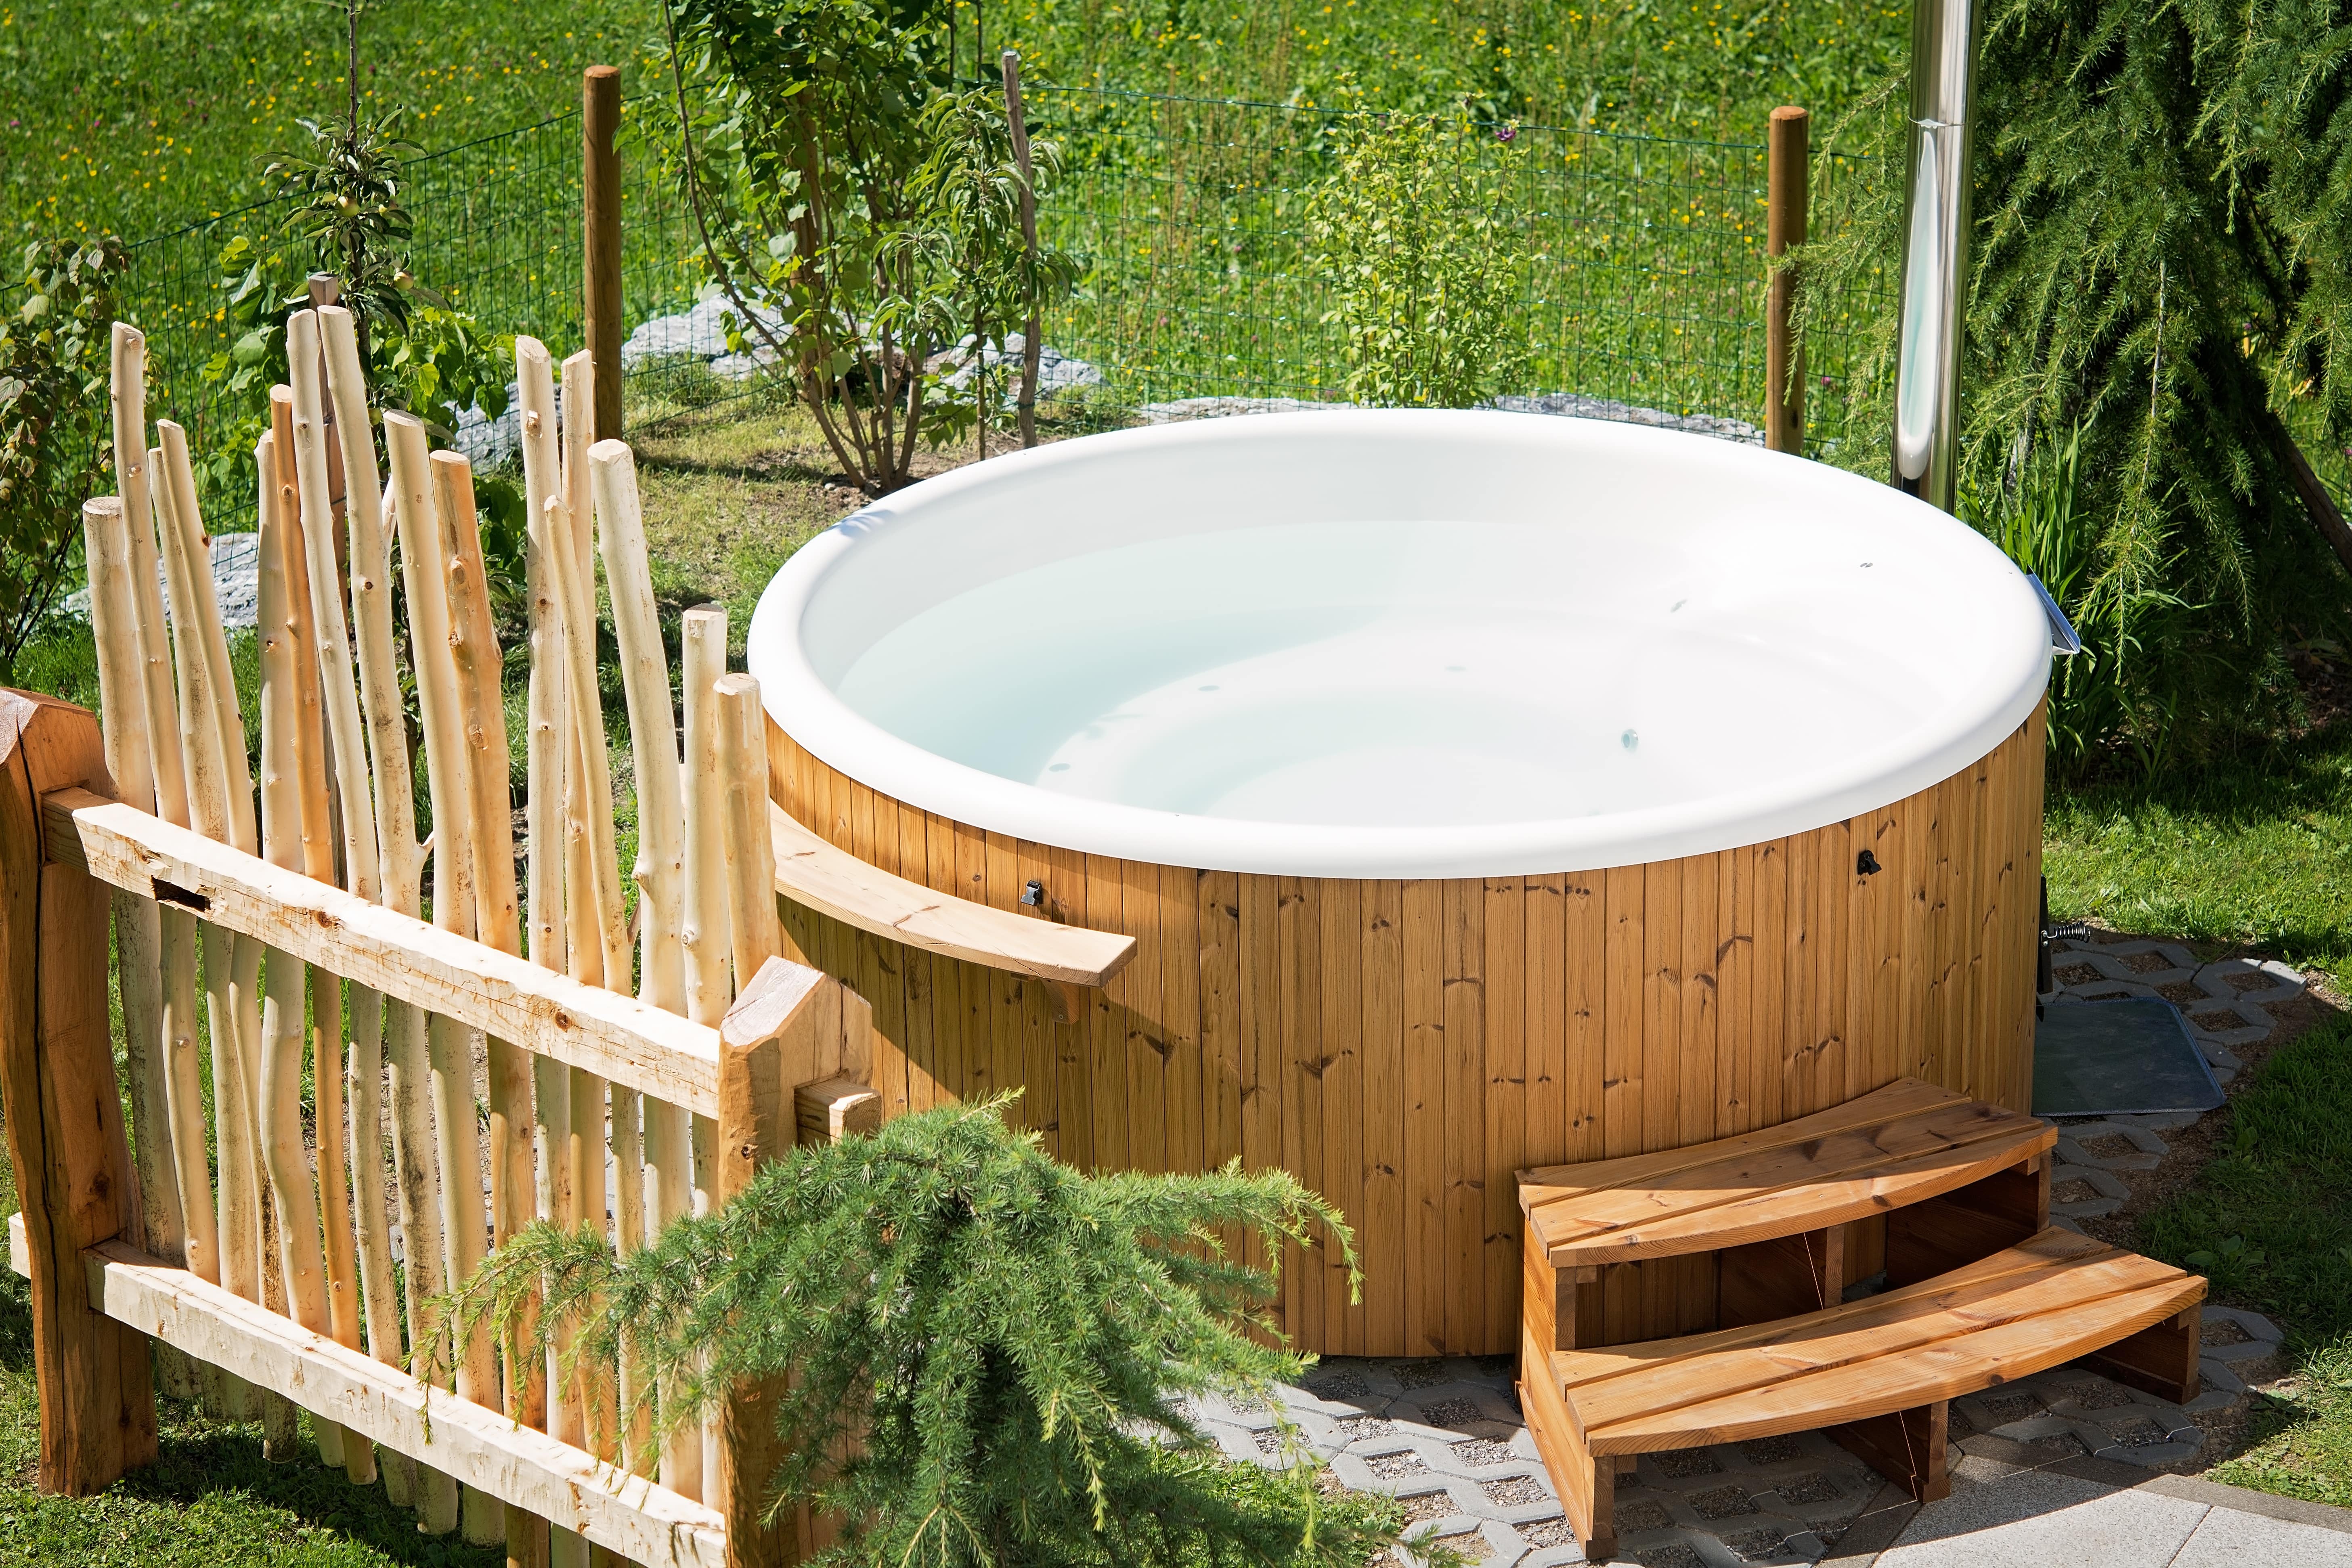 You can find places to stay with hot tubs near Paris, such as this one